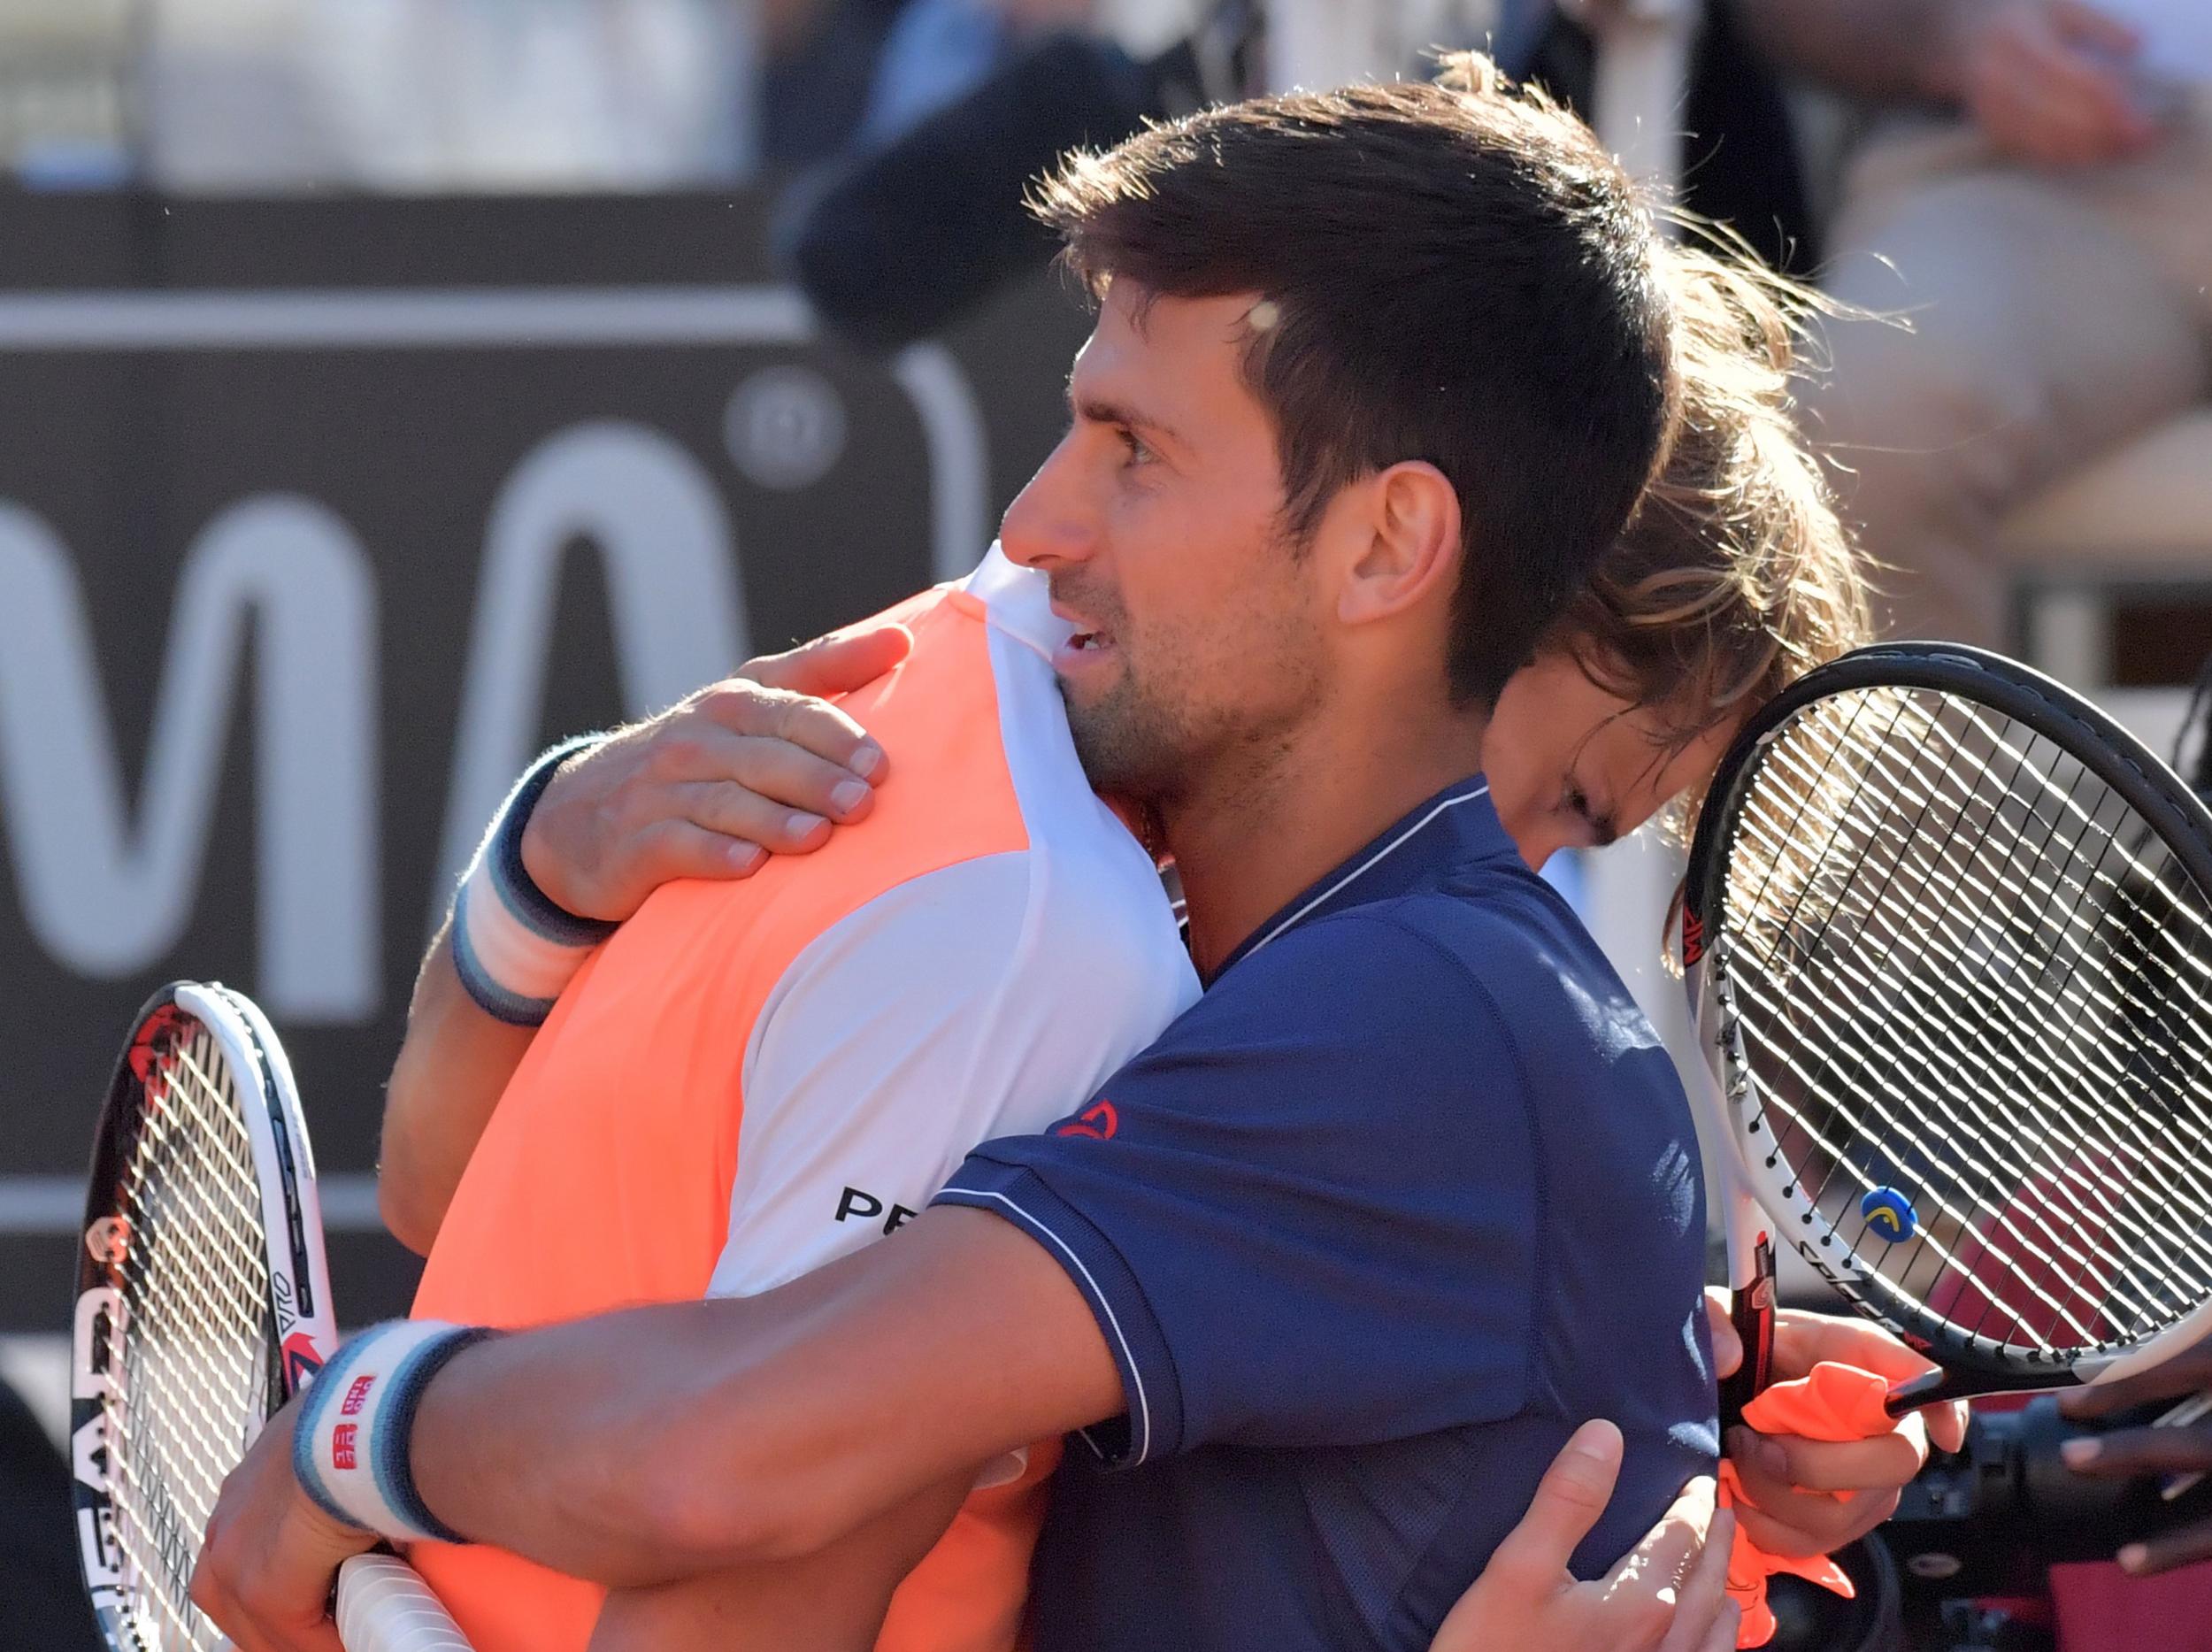 Djokovic appeared drained during his 81-minute defeat